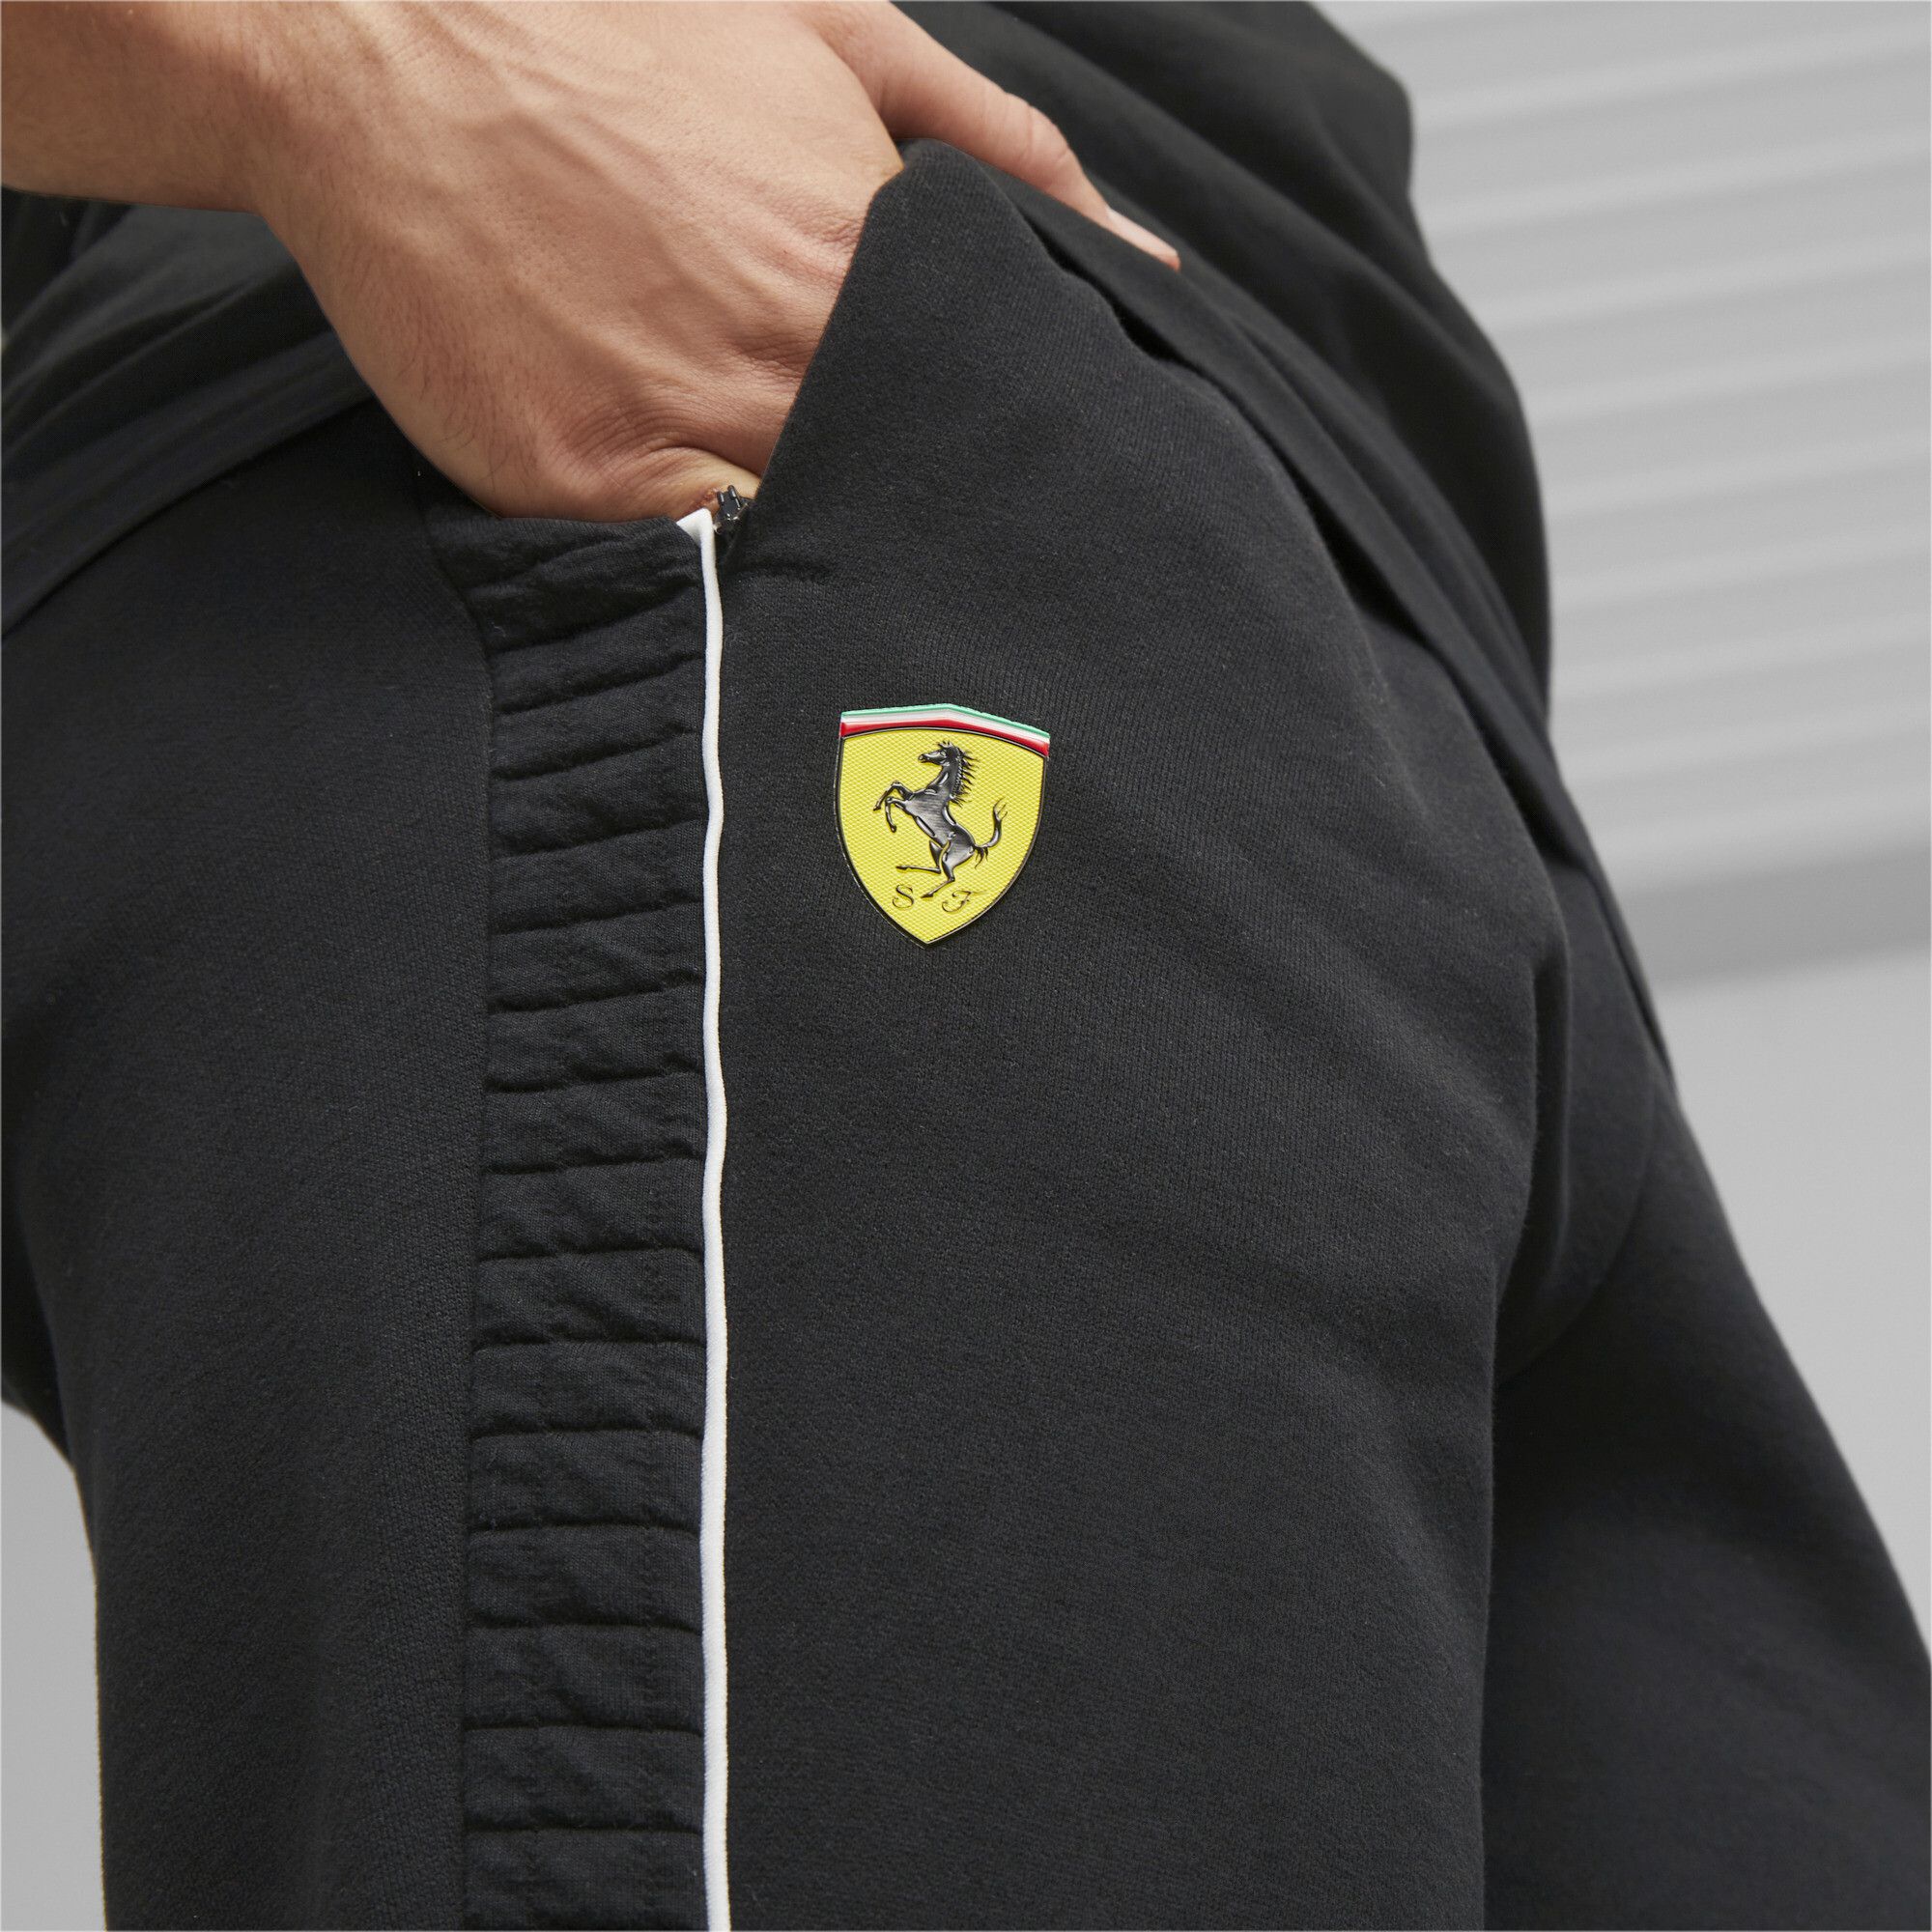 PRODUCT STORY Make a sporting style statement in these pants from Scuderia Ferrari and PUMA. Smart contrast piping and panel inserts with a nod to the chequered flag gives this classic design a fresh new feel. FEATURES & BENEFITS : Recycled Content: Made with at least 20% recycled material as a step toward a better future DETAILS : Elasticated waistband Chequerboard-textured panel inserts Side pockets Contrast piping Scuderia Ferrari branding on front and back PUMA Cat Logo on front